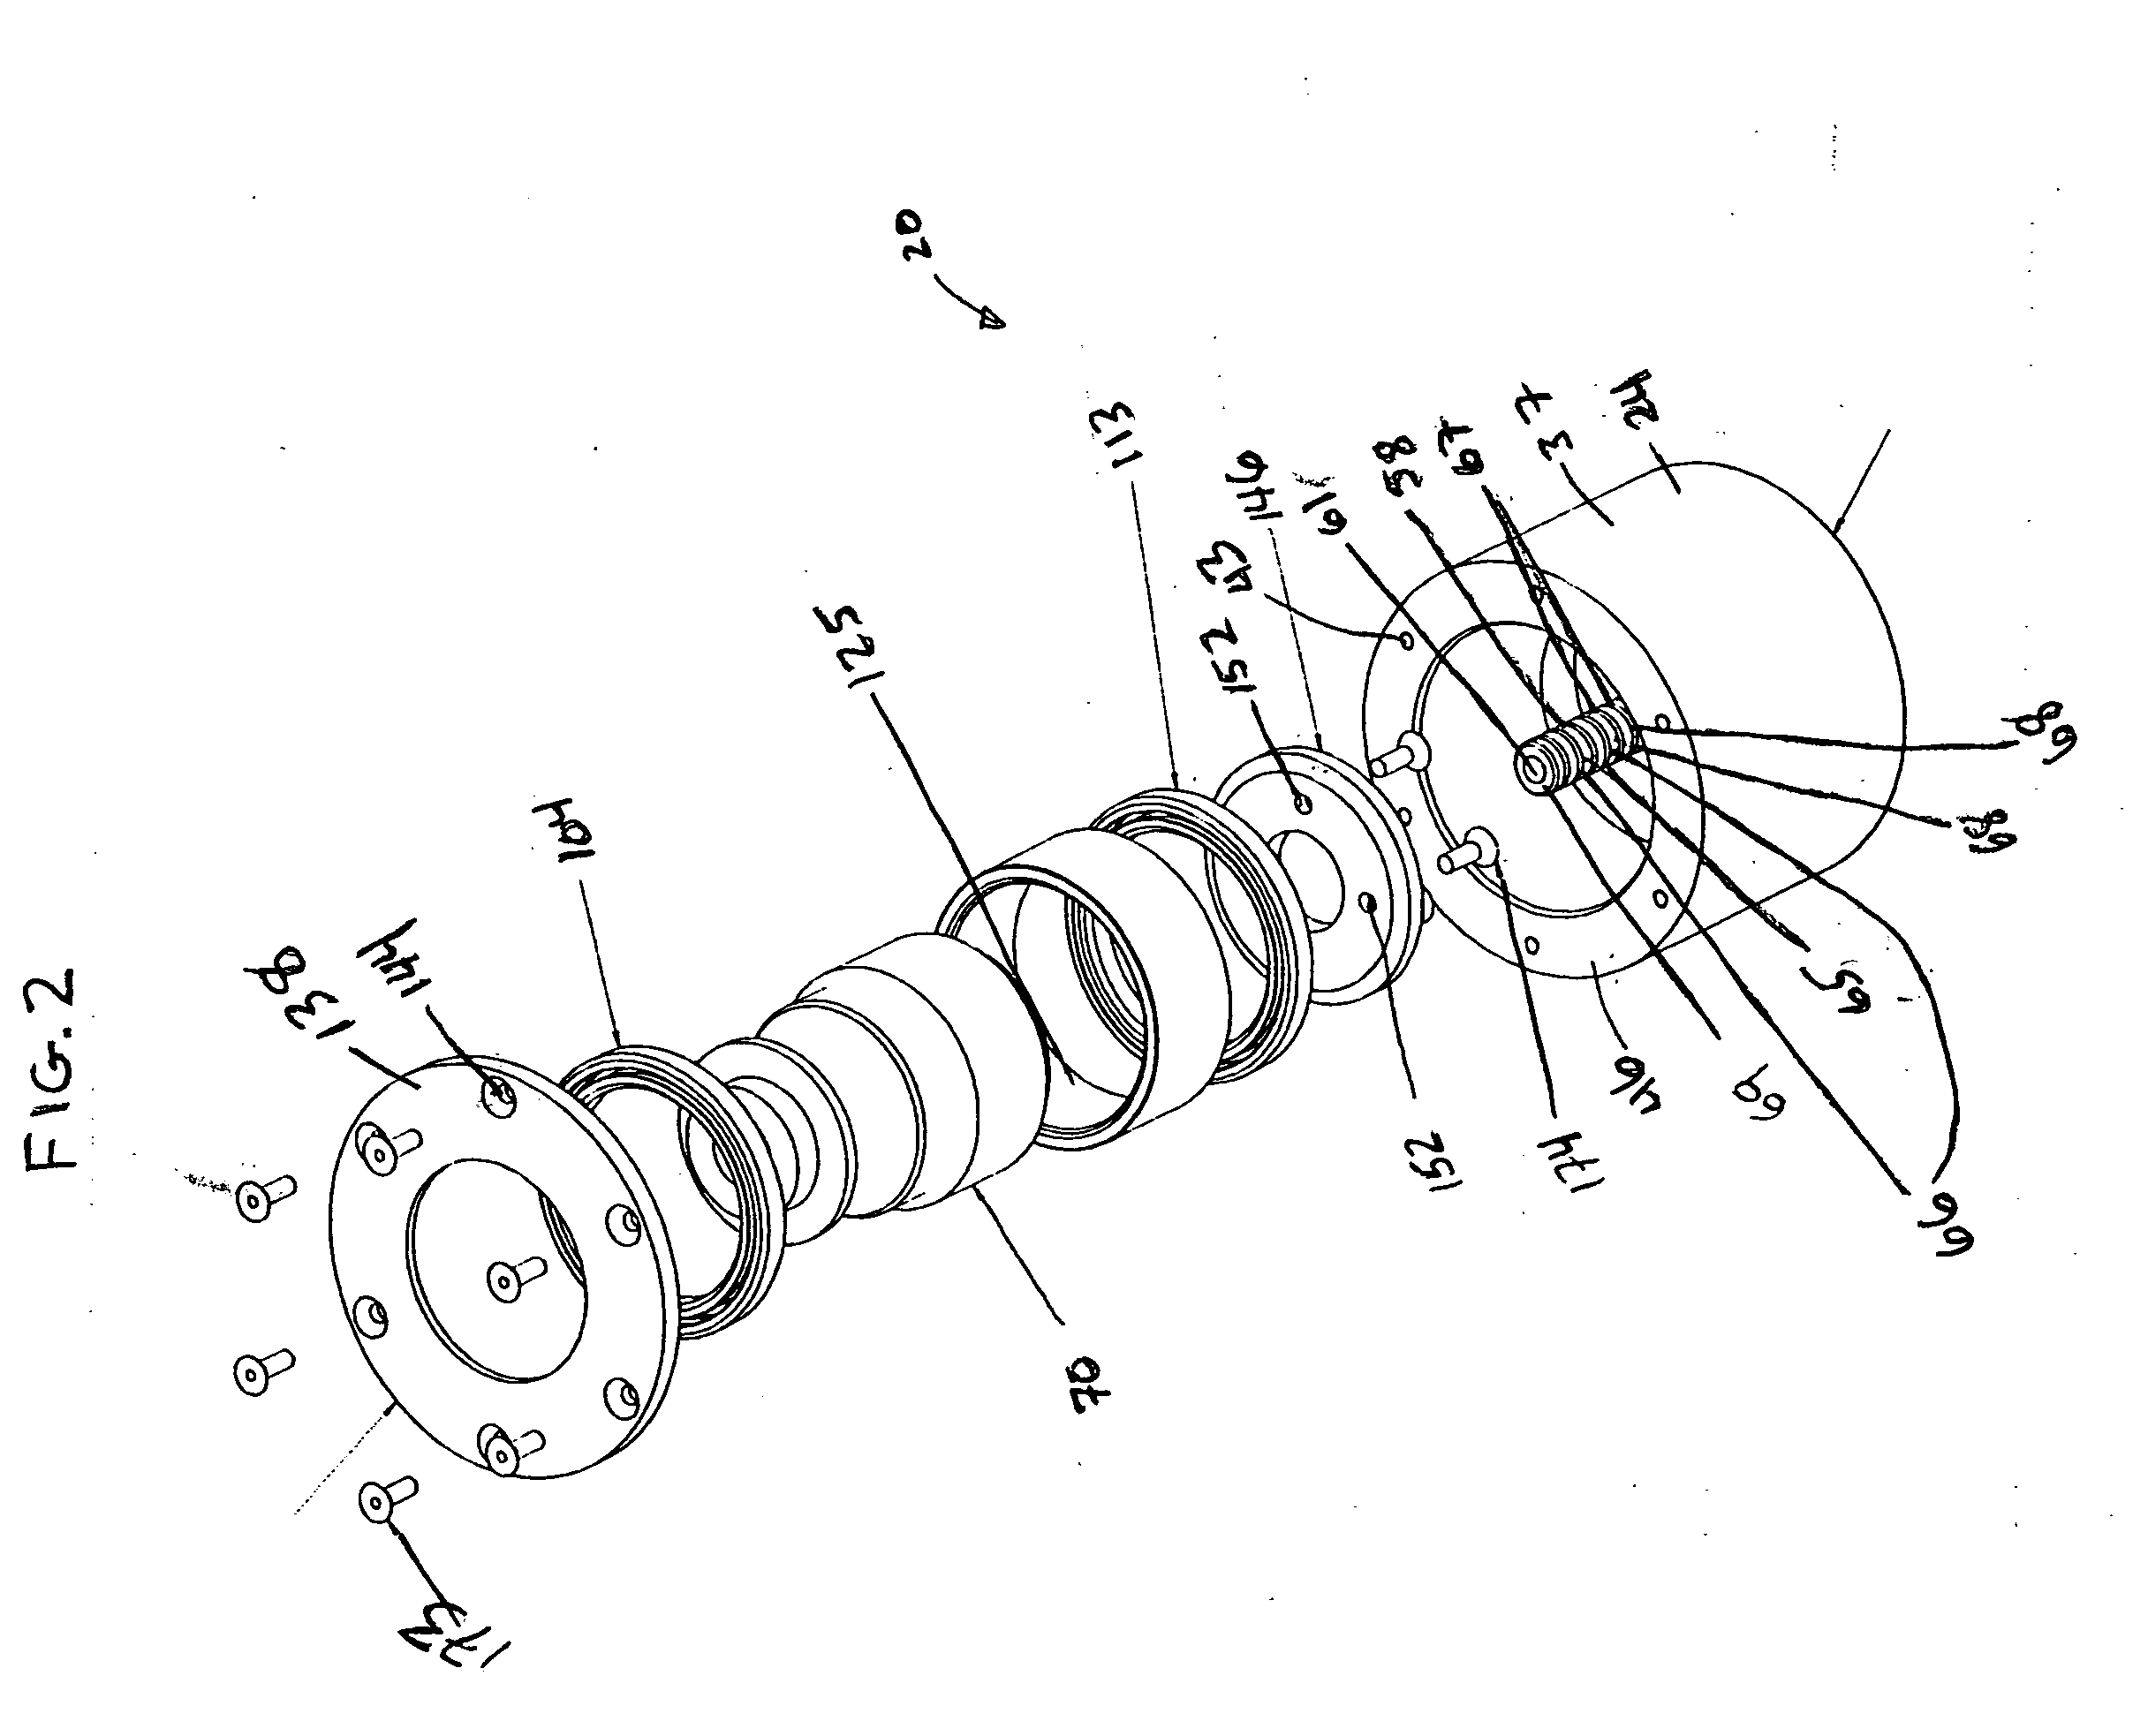 Rotary unions, fluid delivery systems, and related methods